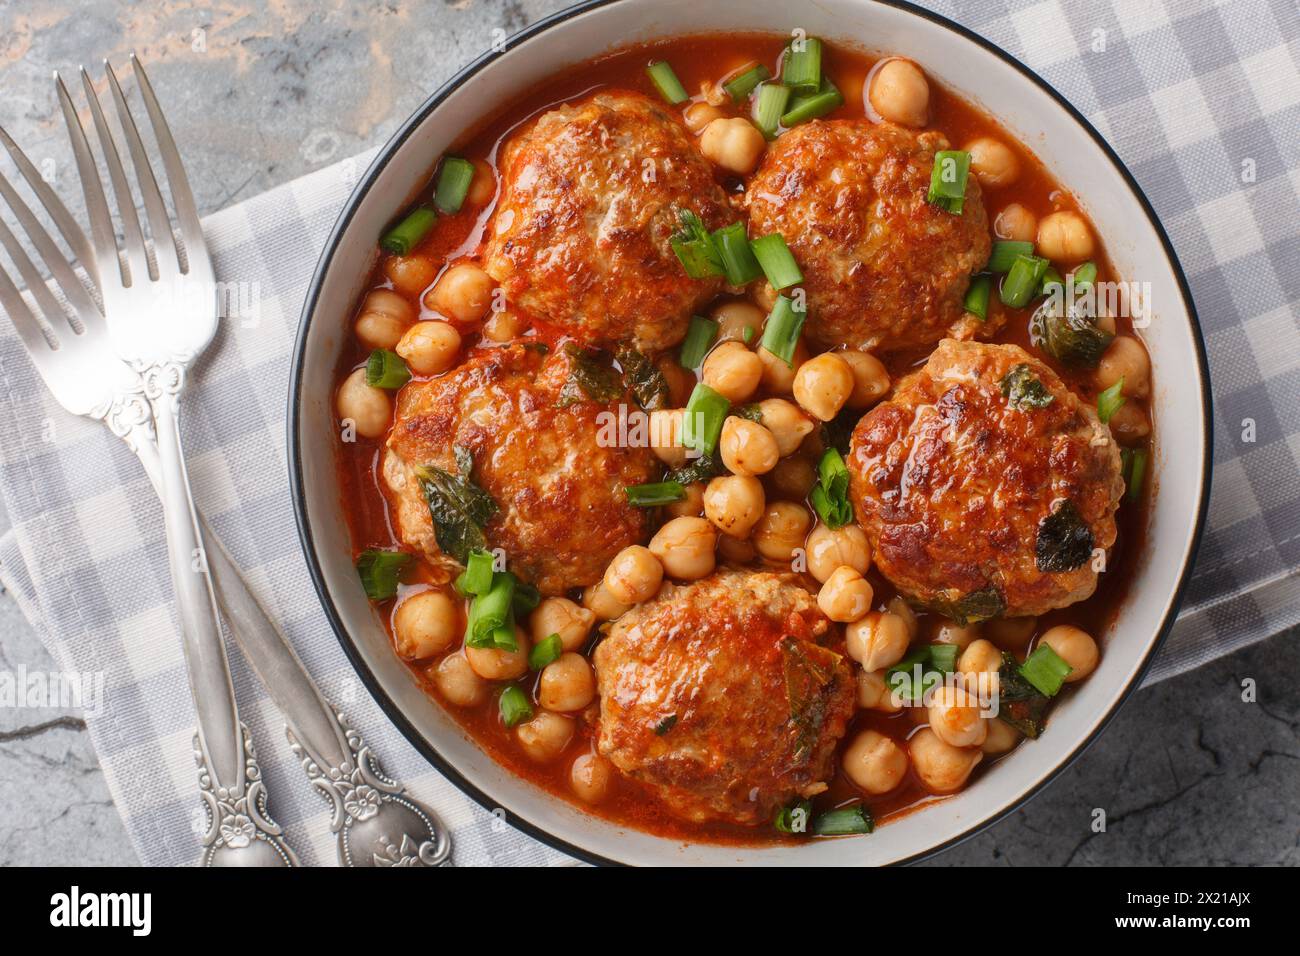 Mediterranean food Lamb meatballs served with chickpeas, tomato and green onions close-up in a bowl on the table. Horizontal top view from above Stock Photo